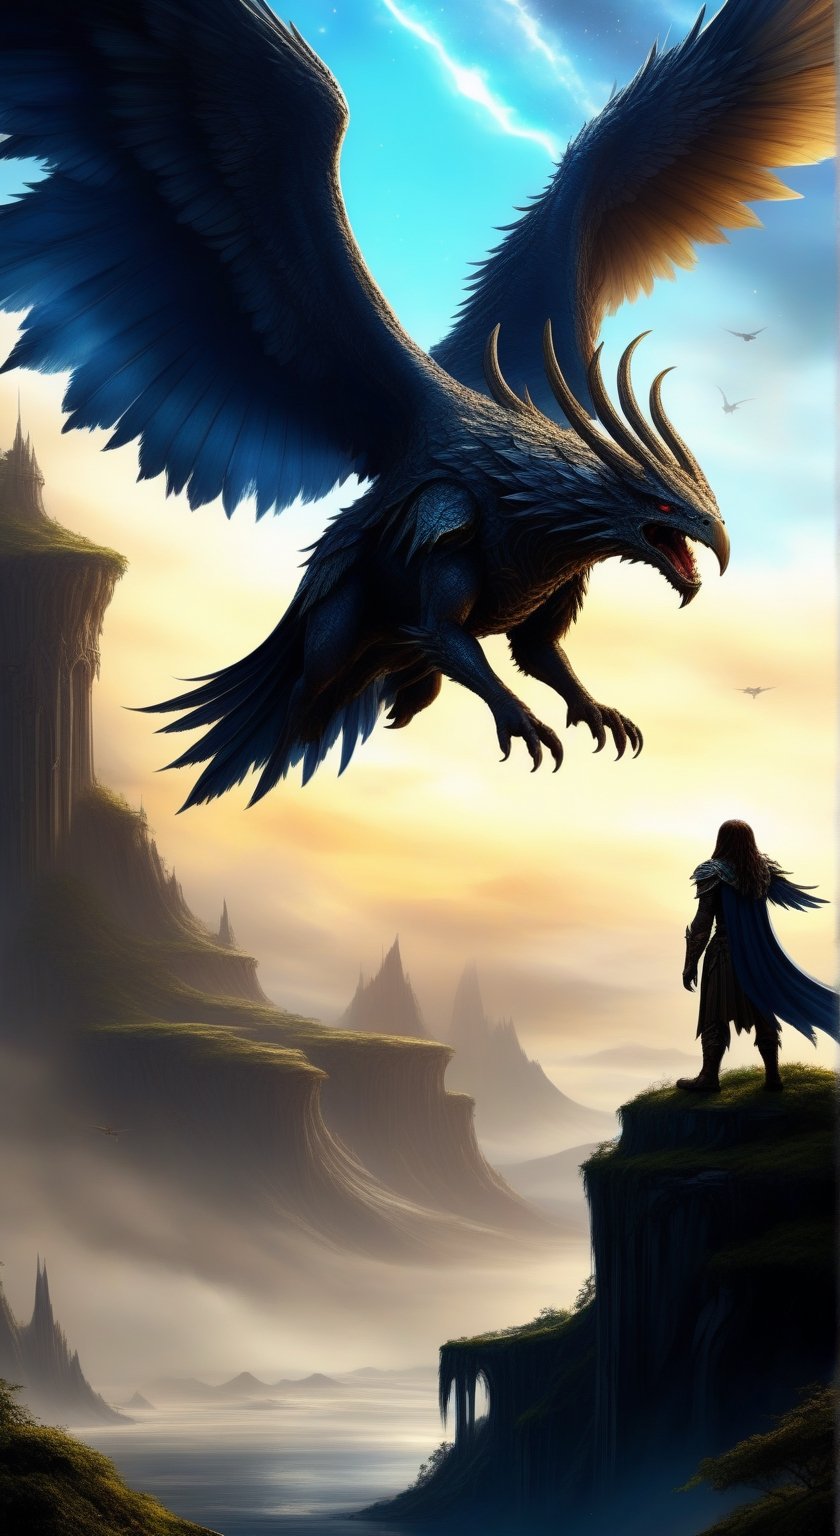   movie poster style, famous artwork inspired by (elden ring:1.4) and (stray:1.1), dappled light, dark corners, detailed expressive eyes, fantasy style, the regal looking many-clawed aaaaaaarghfly, a creature of the tingspurdled skies, shown here with its majestic ramshmorgeling wings outstretched as it soars above a sylvified realm of tragulified islands and vibrant cascading doover of planet nomturf tertius, ultra detailed, 8k, uhd  